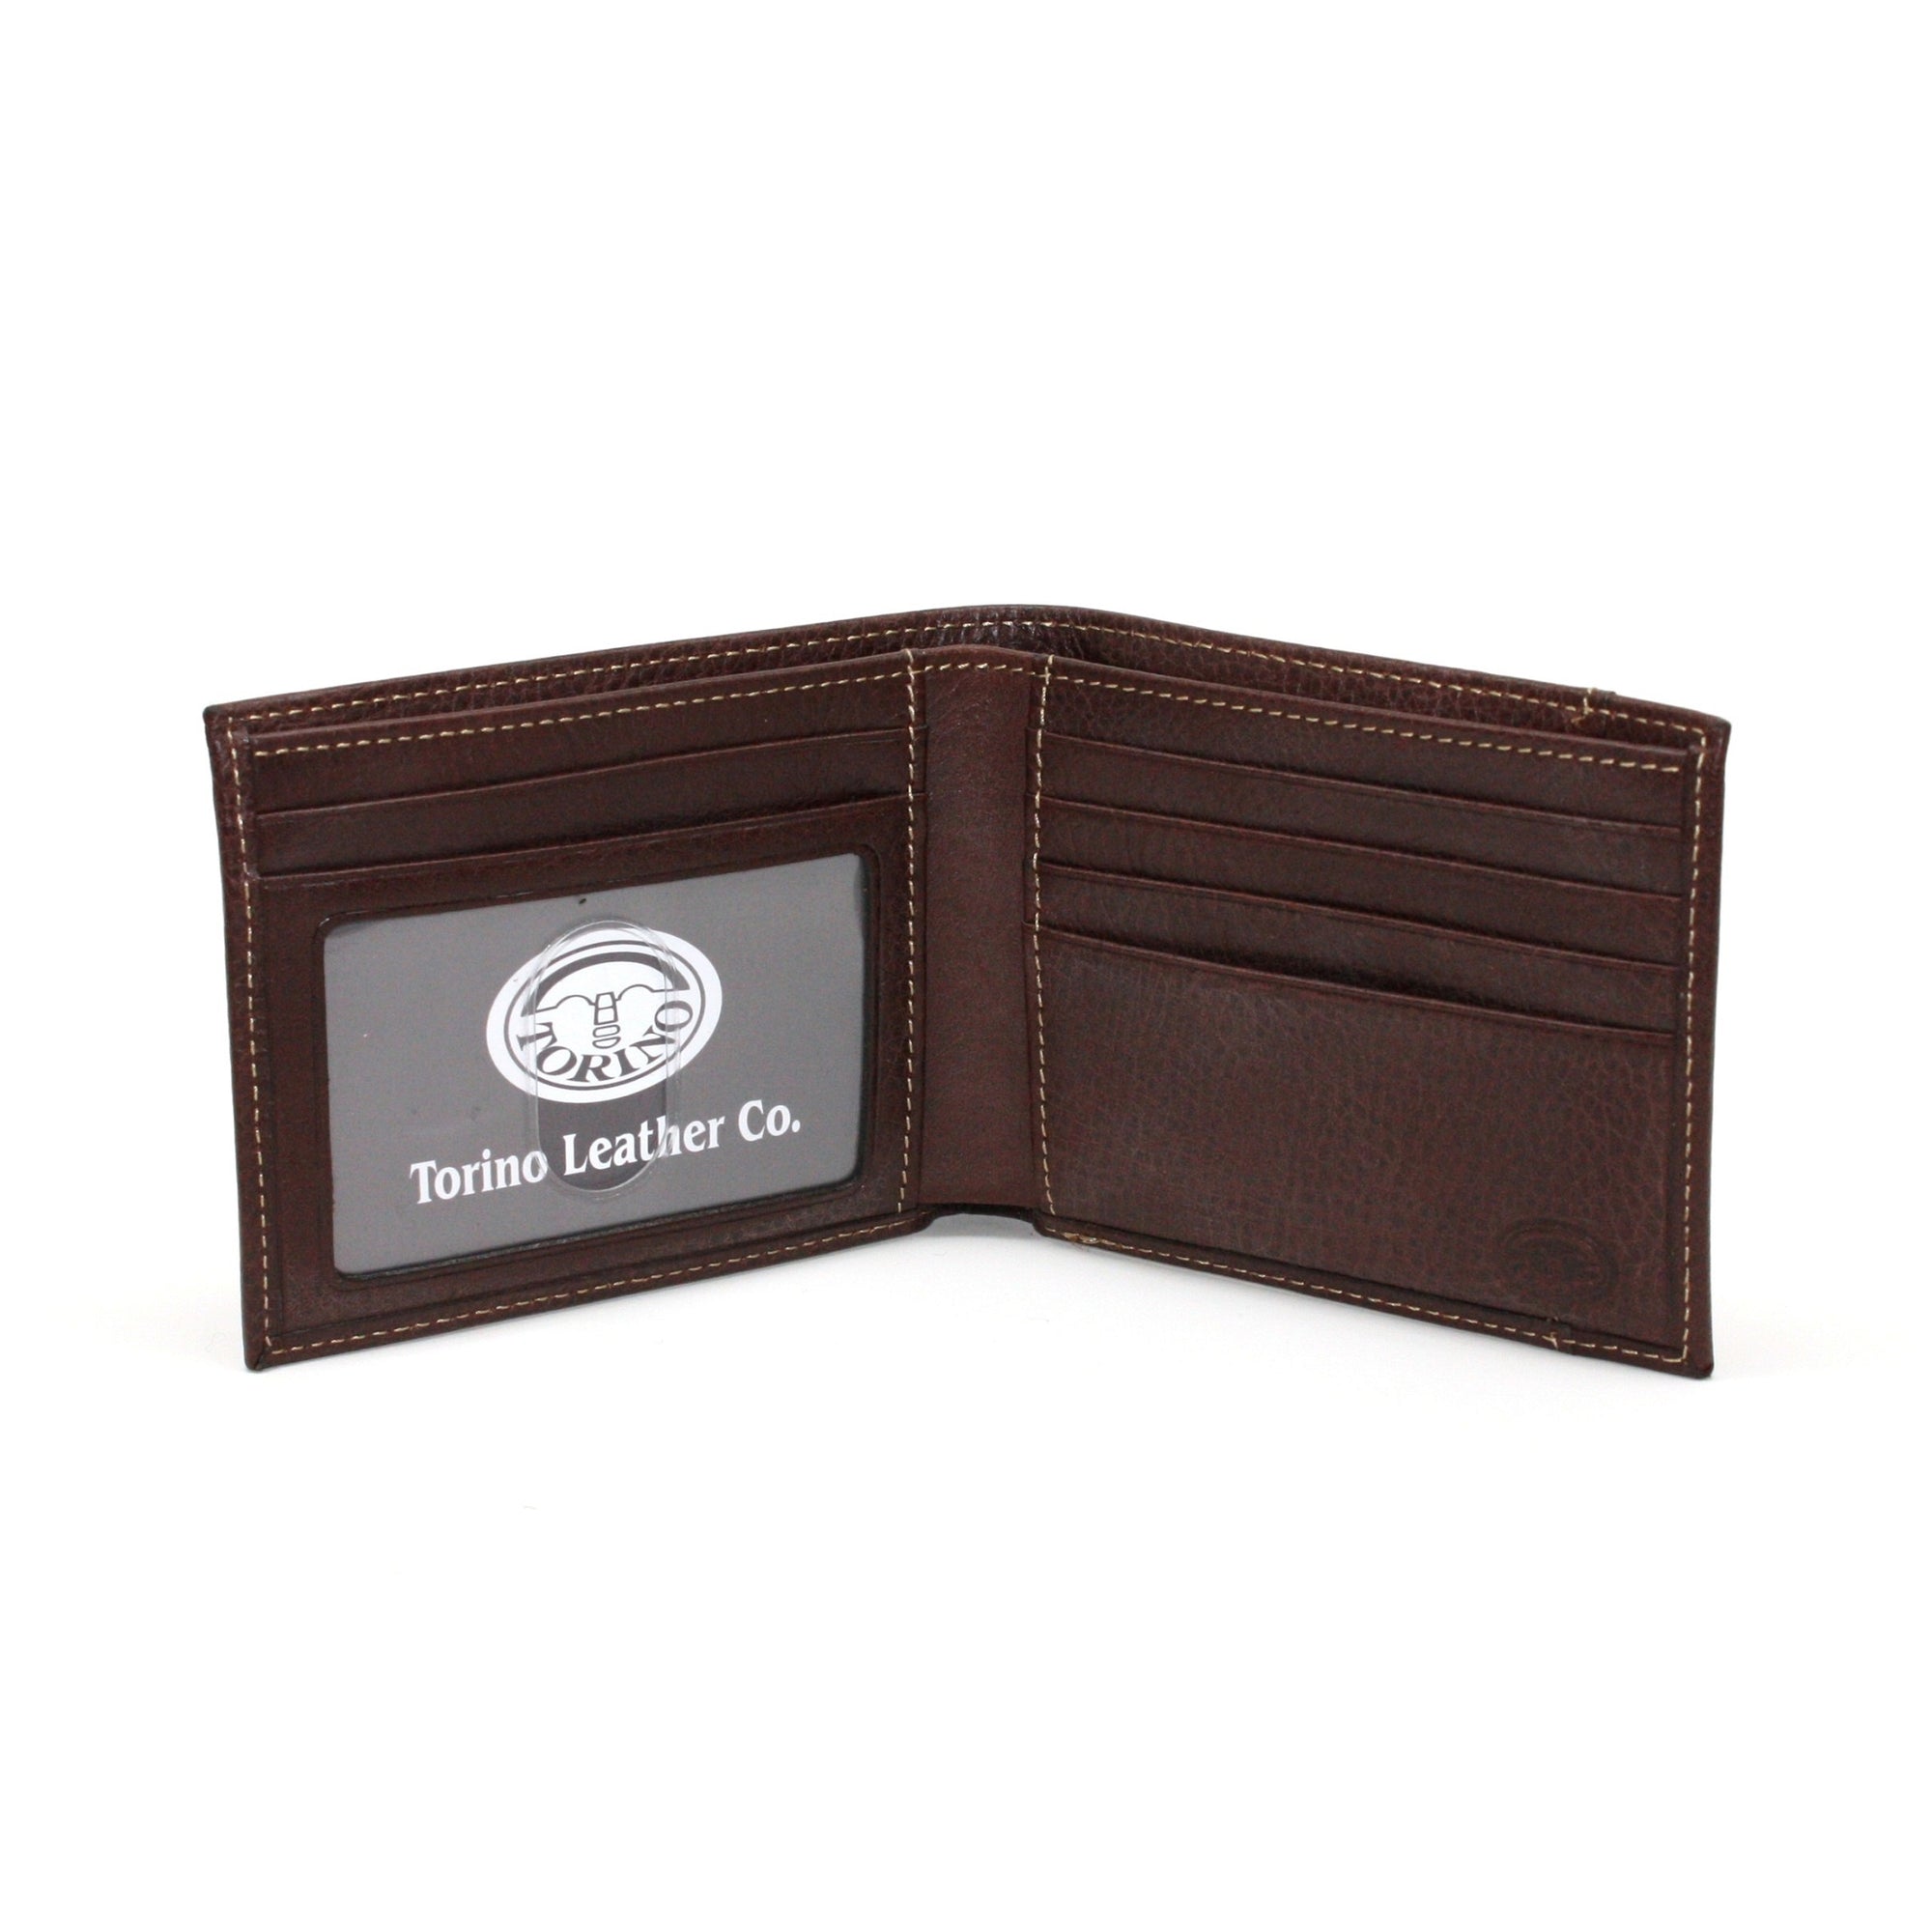 Tumbled Glove Leather Billfold Wallet in Brown by Torino Leather